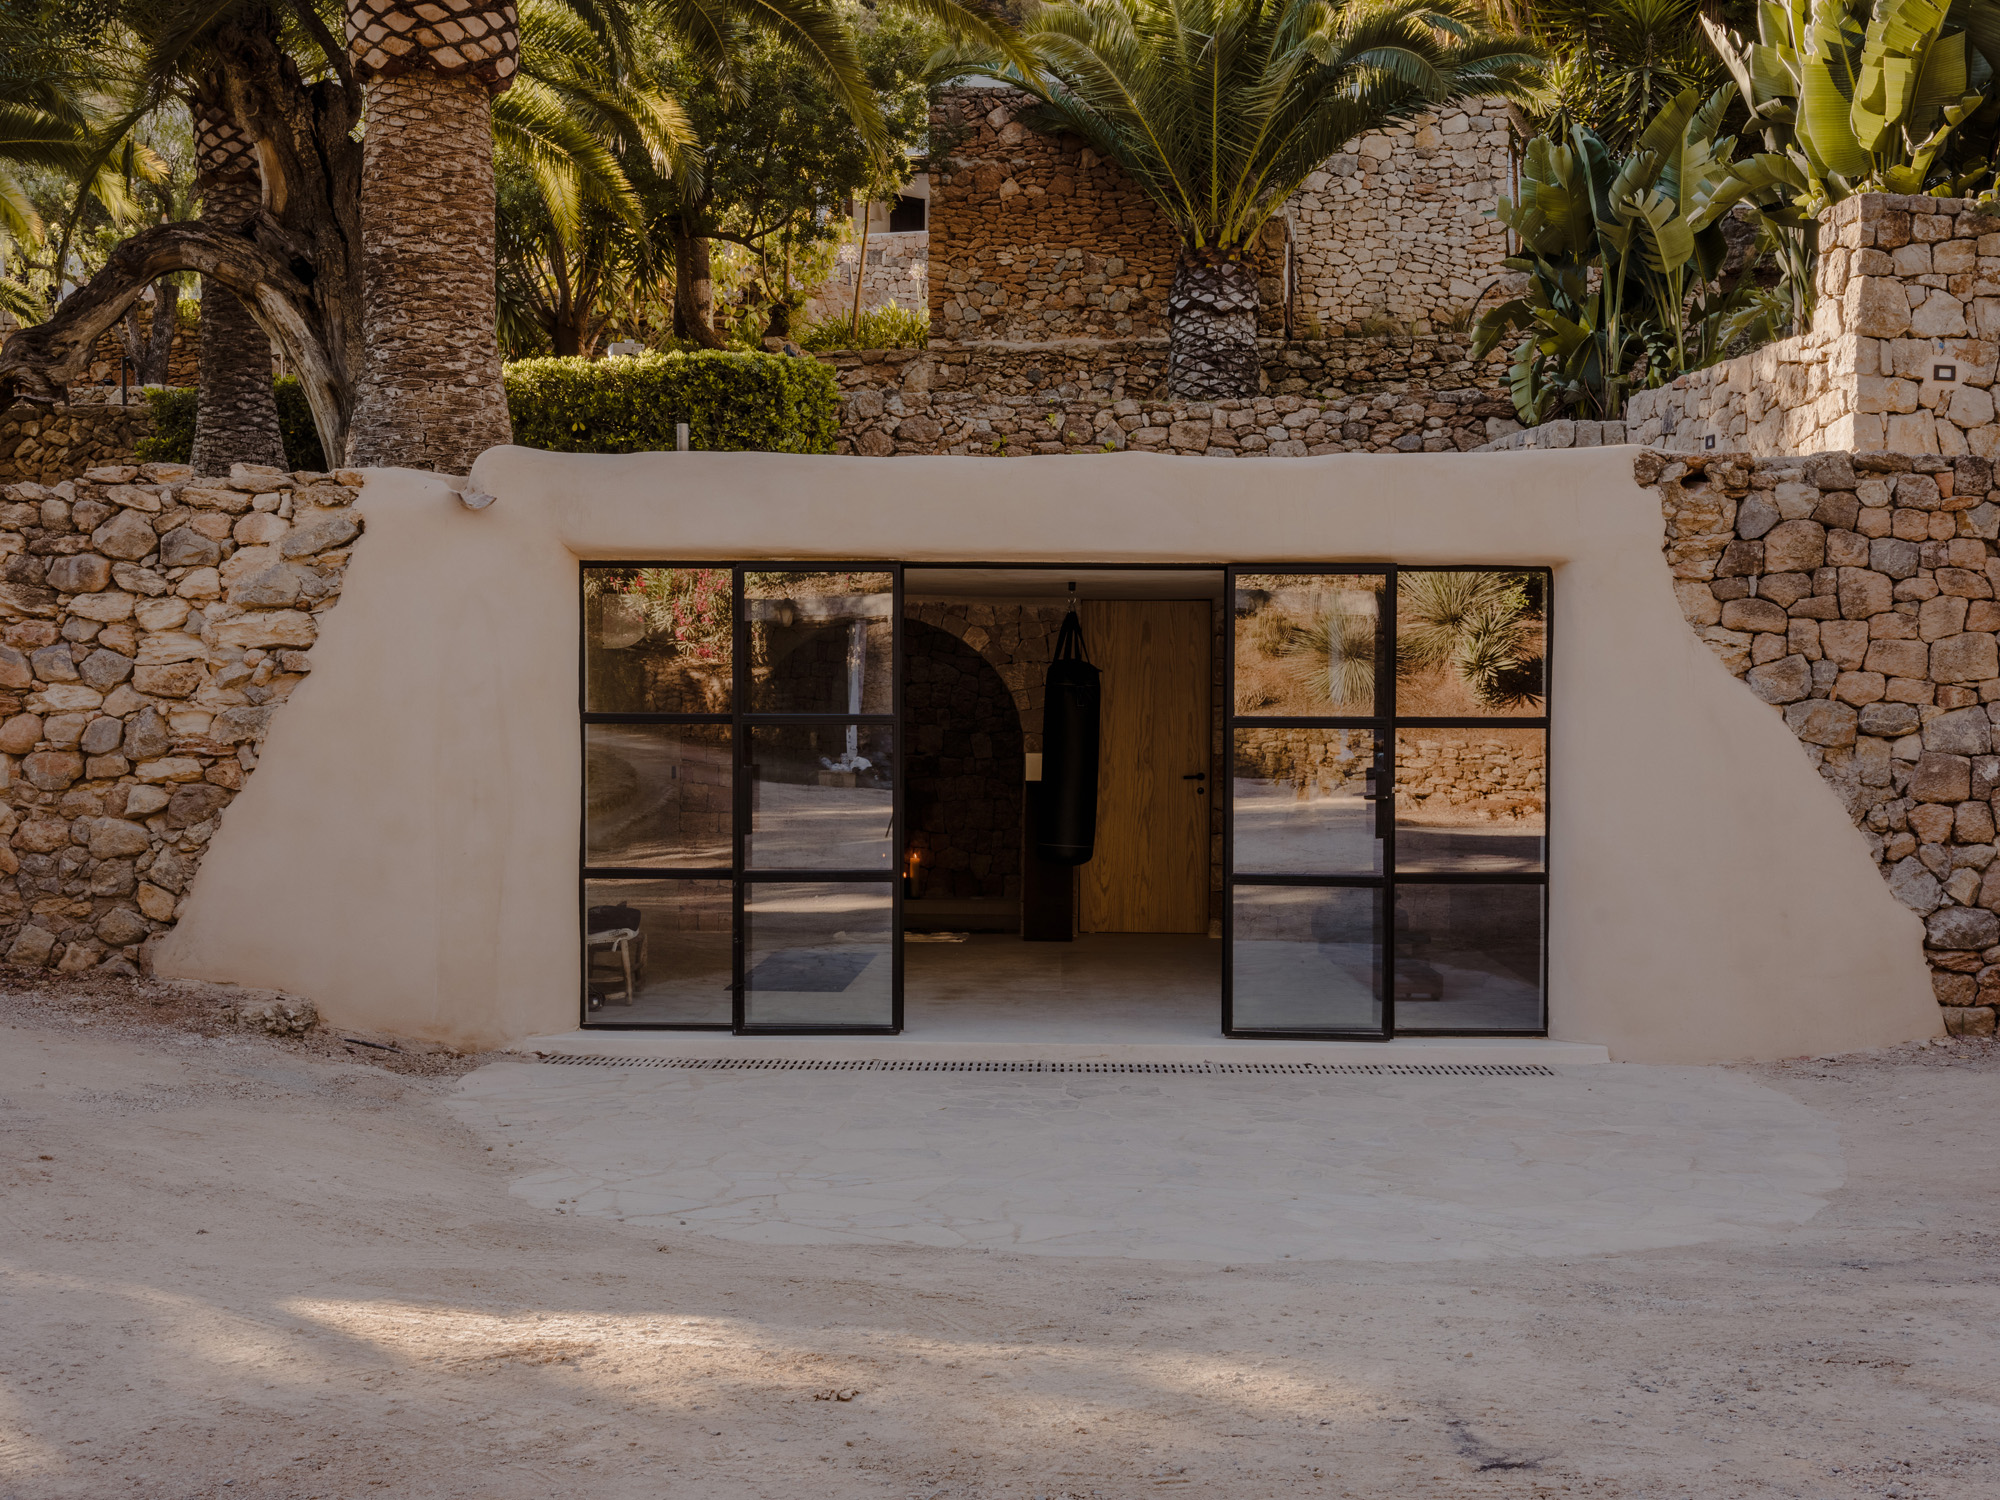 Finca Alma thermal spa and gym with Crittall doors